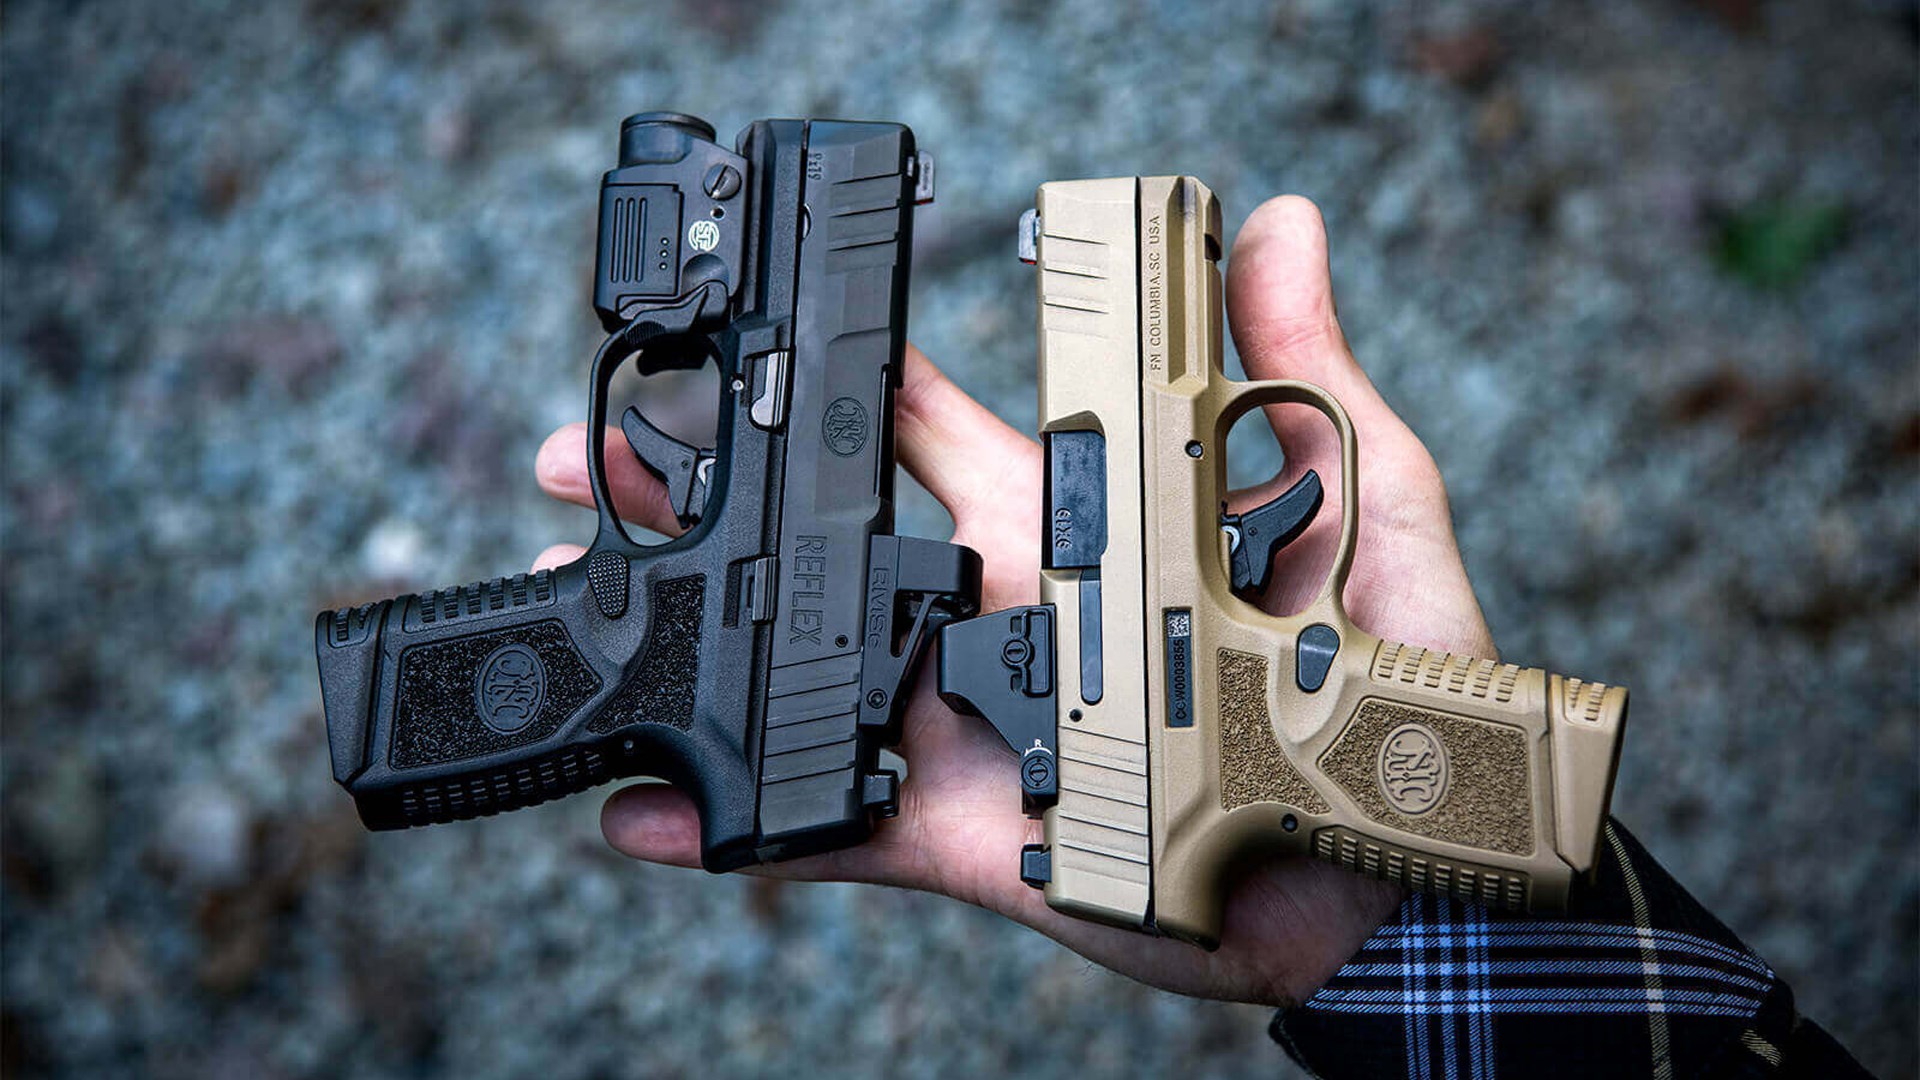 two guns fn america reflex pistol 9 mm micro compact personal defense concealed carry side by side view comparison black brown fde